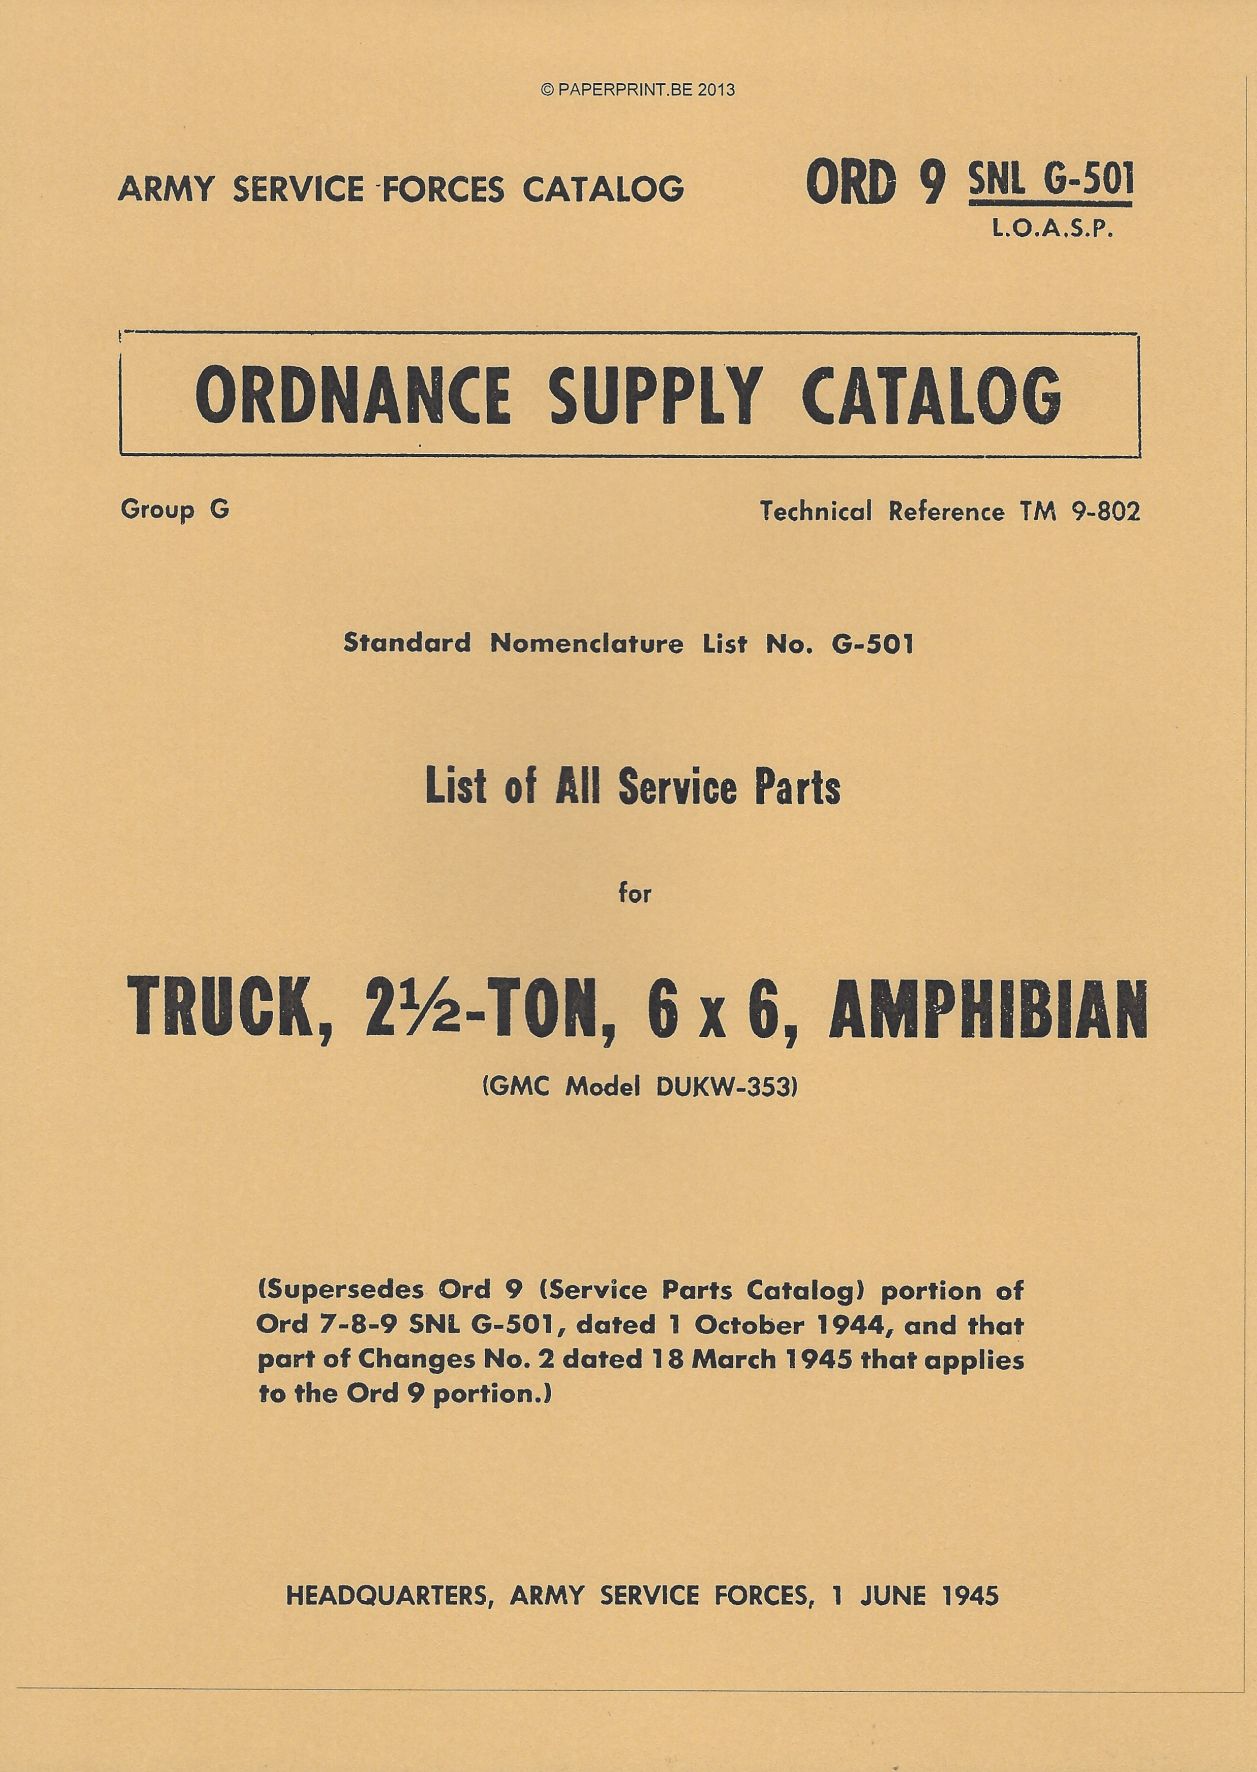 SNL G-501 US LIST OF ALL SERVICE PARTS FOR TRUCK, 2 ½ - TON, 6 x 6, AMPHIBIAN (GMC MODEL DUKW-353)